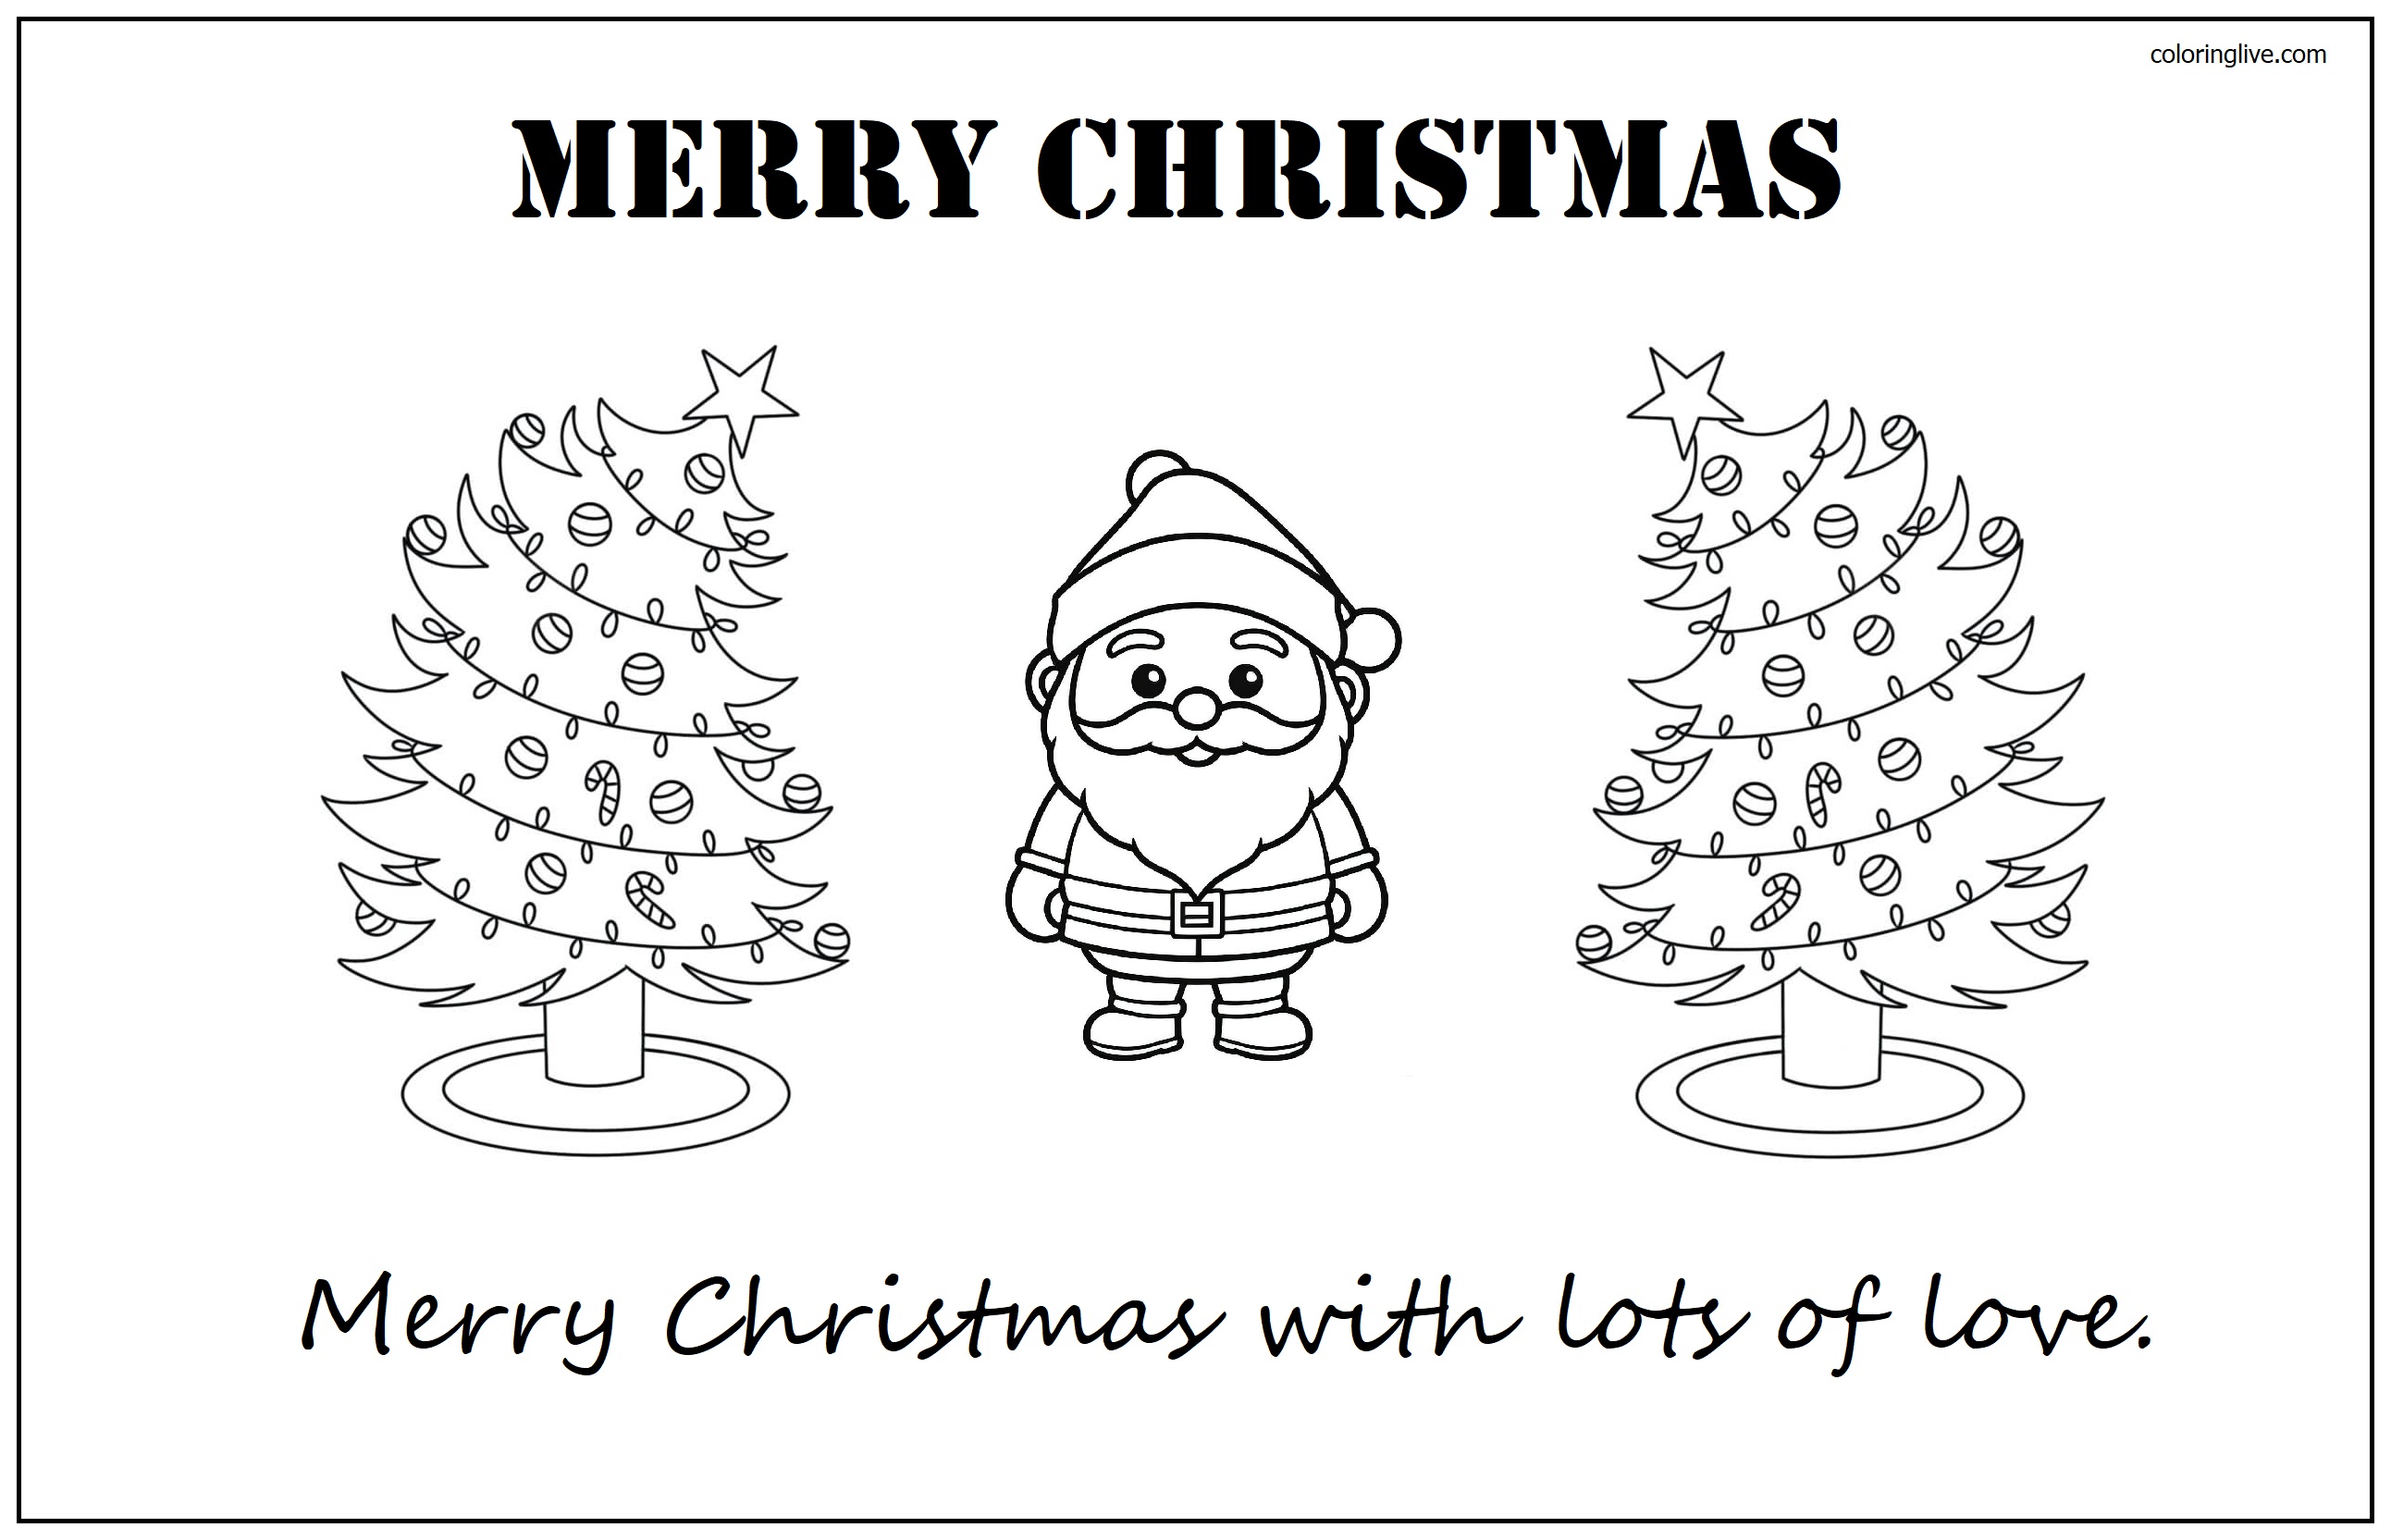 Printable Merry Christmas with lots of love Coloring Page for kids.